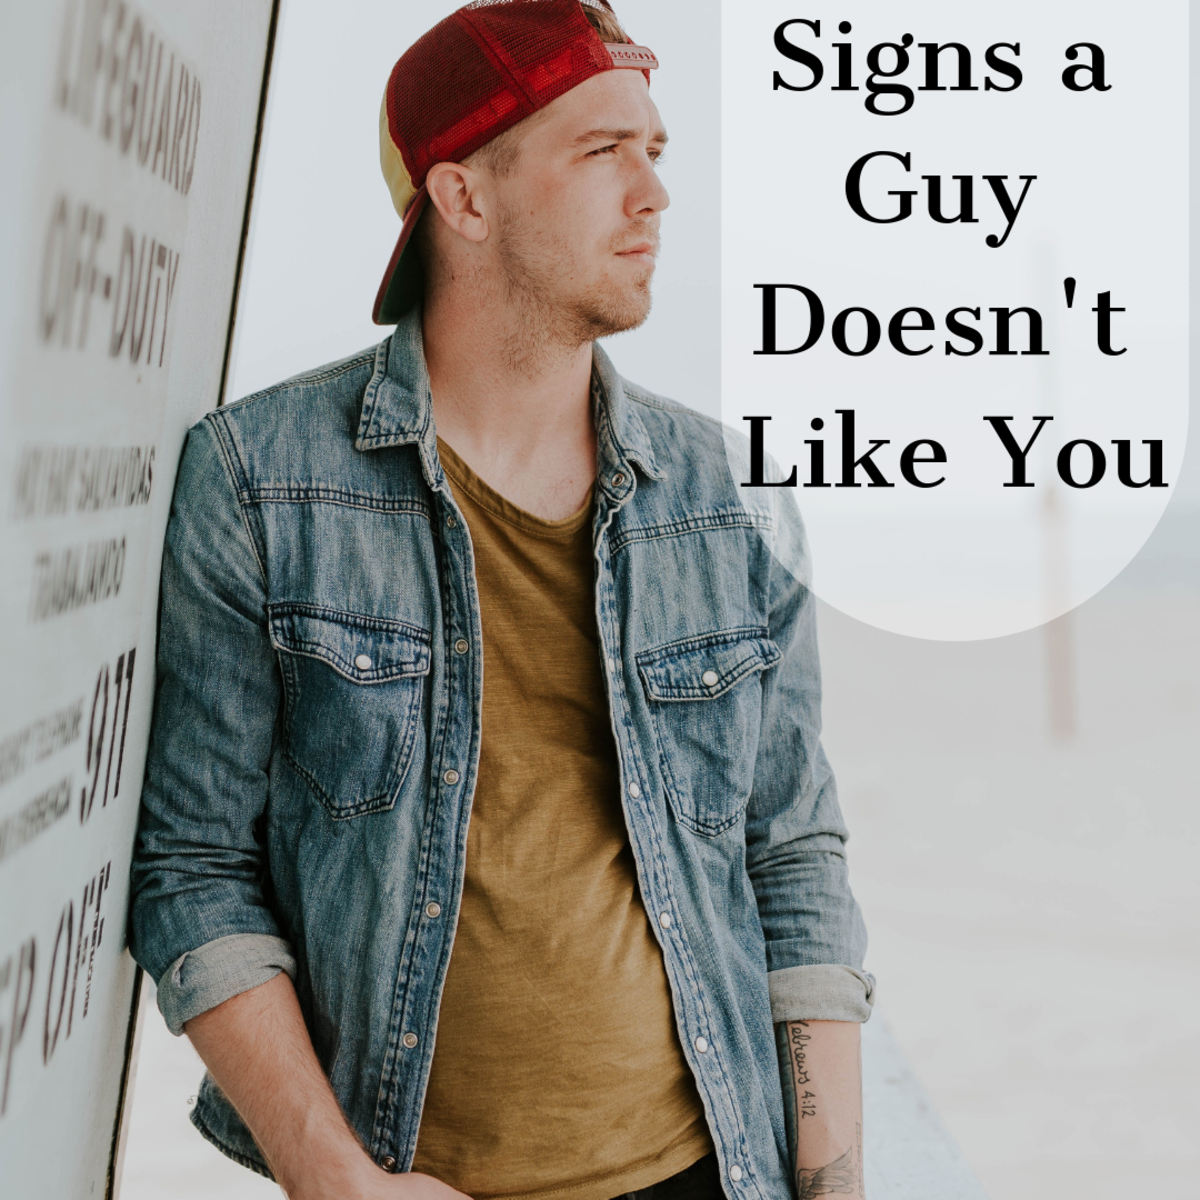 30-signs-that-tell-a-guy-doesnt-like-you